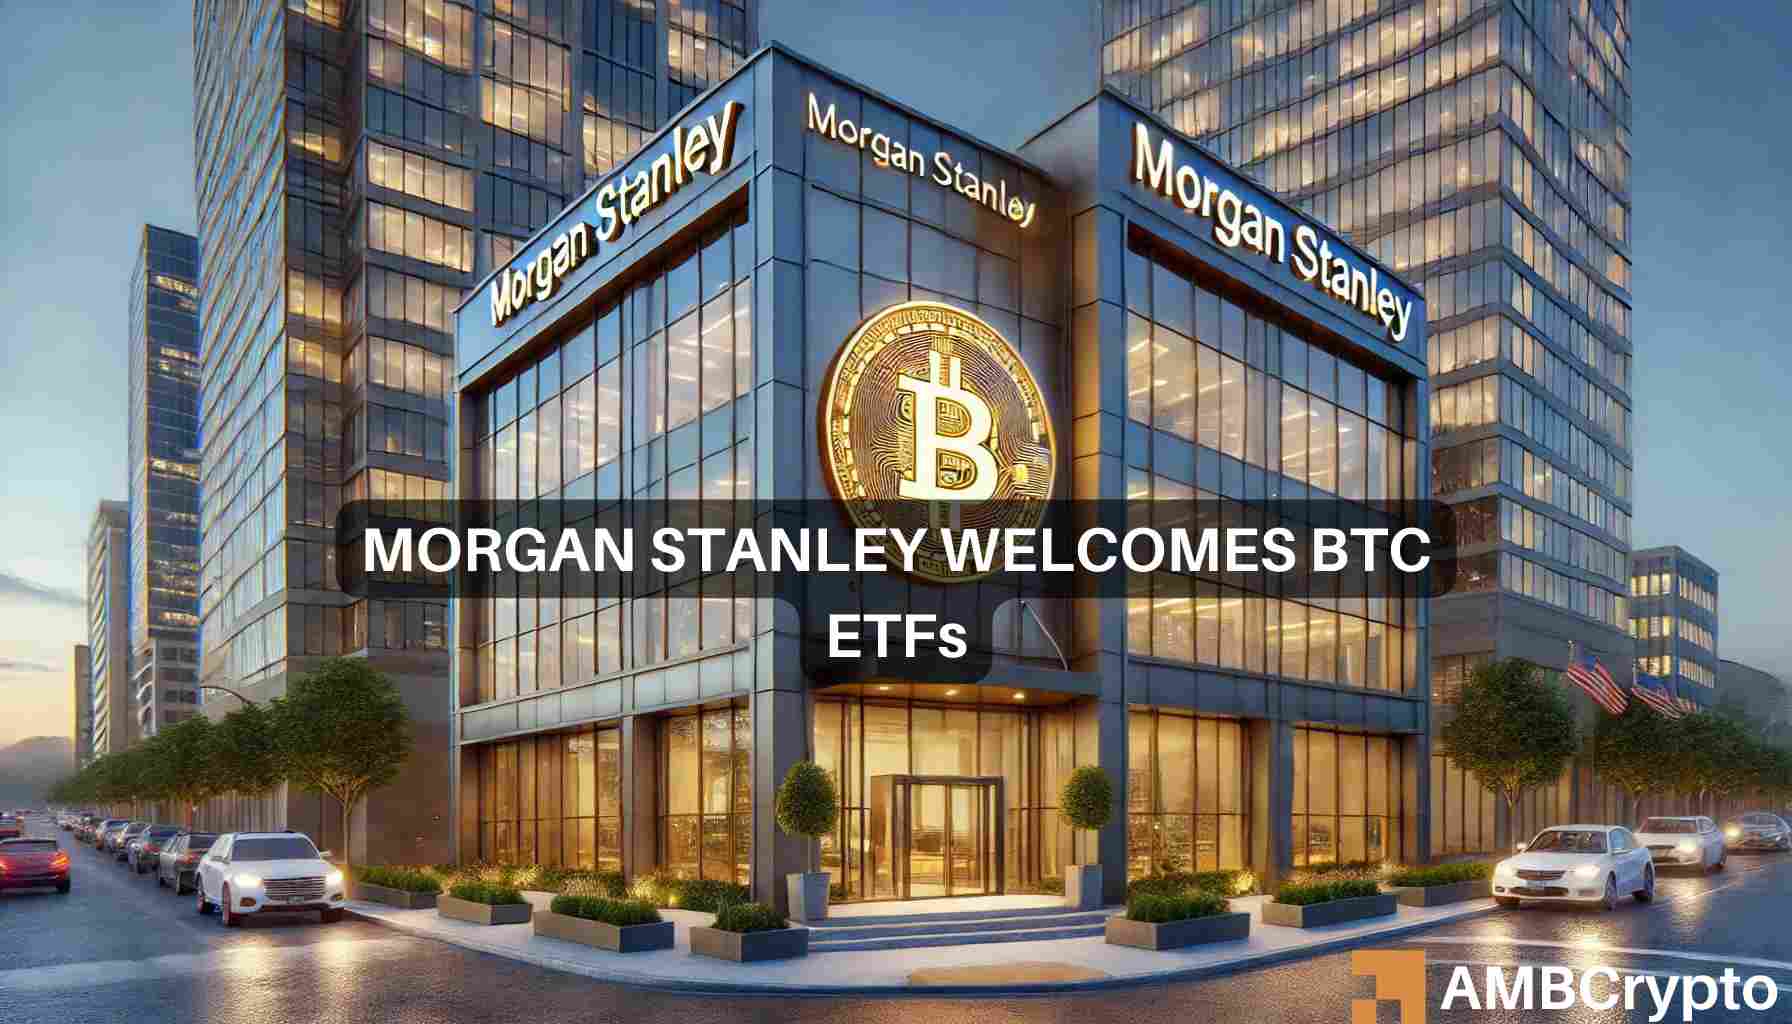 How Morgan Stanley’s ETF move is spurring Bitcoin’s ‘second-wave adoption’